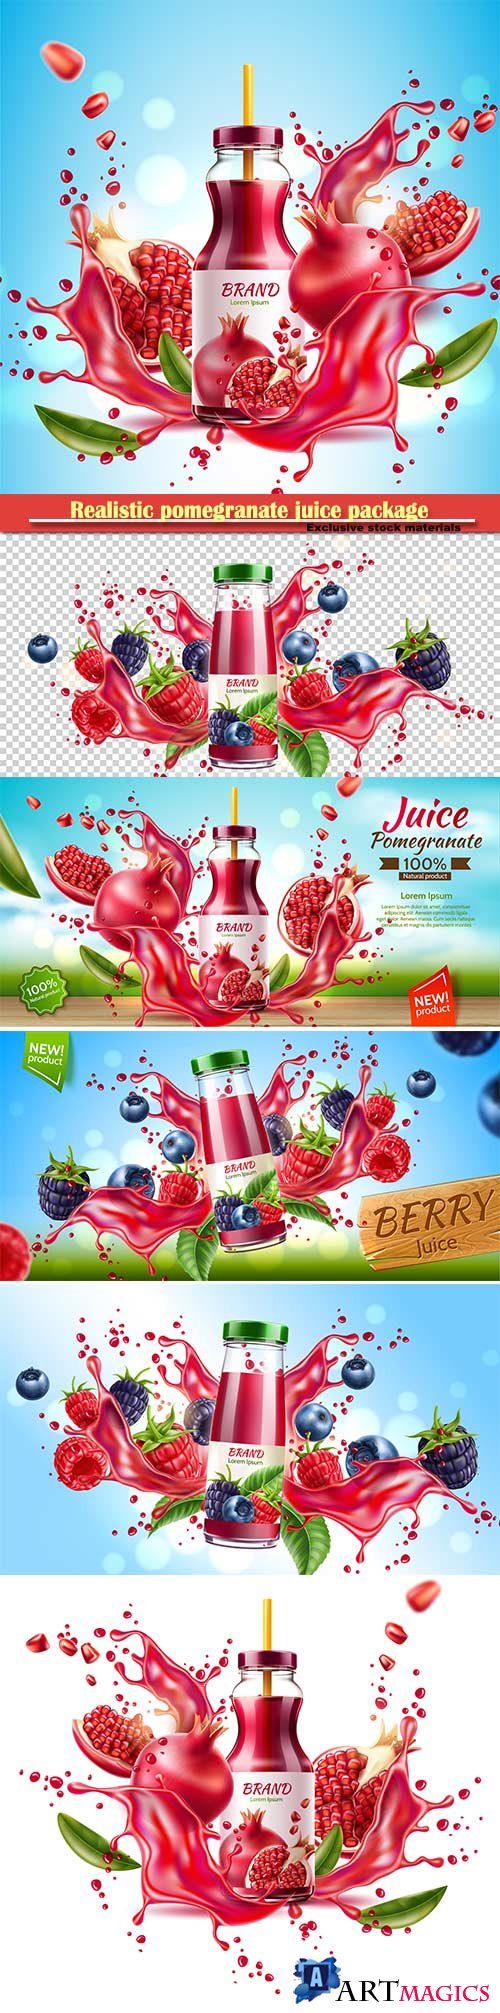 Realistic pomegranate juice package advertising design